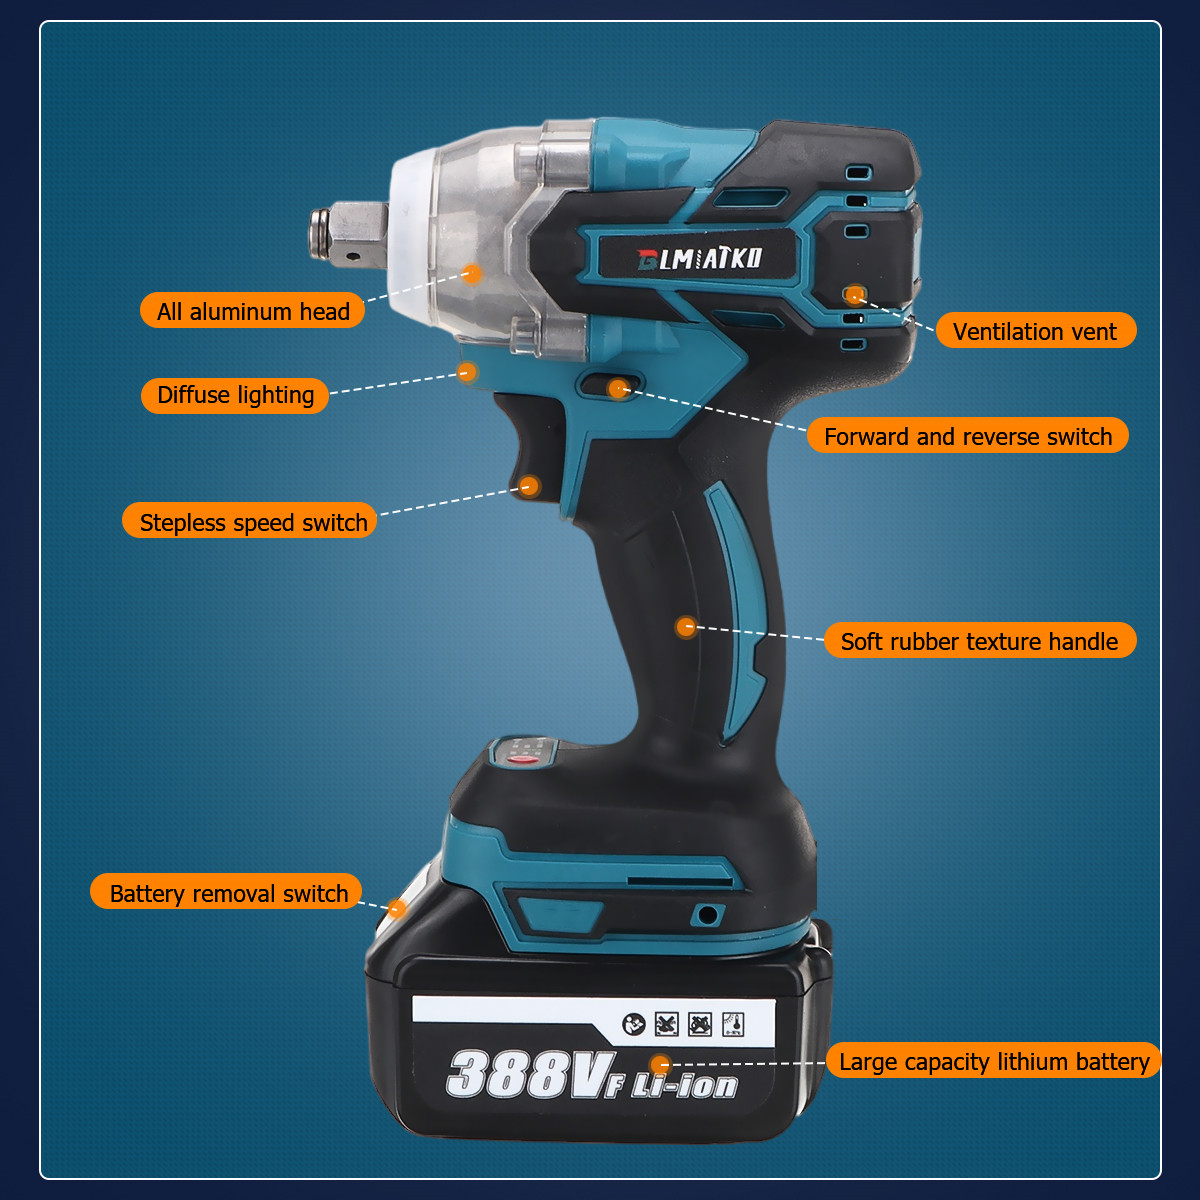 BLMIATKO-388VF-520Nm-Electric-Brushless-Impact-Wrench-Rechargeable-Woodworking-Maintenance-Tool-with-1919212-5